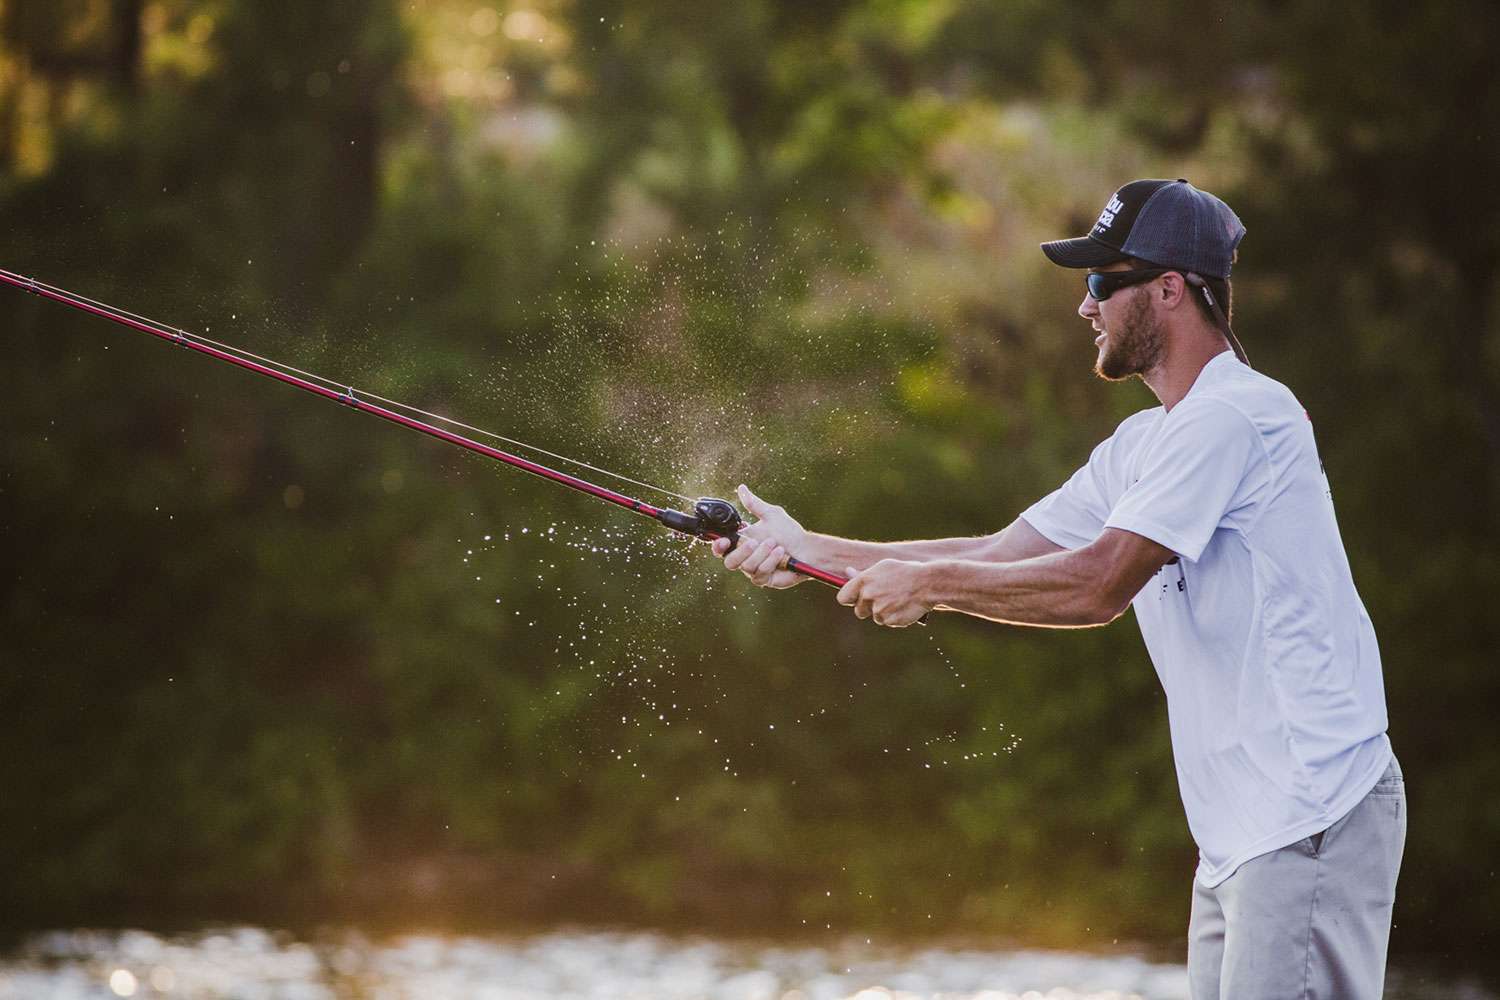 <p><b>Abu Garcia Veracity 3M Powerlux</b></p>
The new Abu Garcia Veracity 3M Powerlux is the next generation in high-performance rods. Complete with premium carbon blanks featuring proprietary 3M Powerlux 300 resin combines an ultra-light feel with the durability expected from quality Abu Garcia products. The 3M Powerlux 300 resin system makes the rods on average 30 percent stronger than previously Veracity rods. The specially designed resin prevents cracks in the blank material and dramatically improves the rod tip with its dense yet lightweight construction. The new rods are available in casting, spinning and swimbait models.<br>
<p><b>MSRP: $199.95 to $249.95</b></p>
<a href=